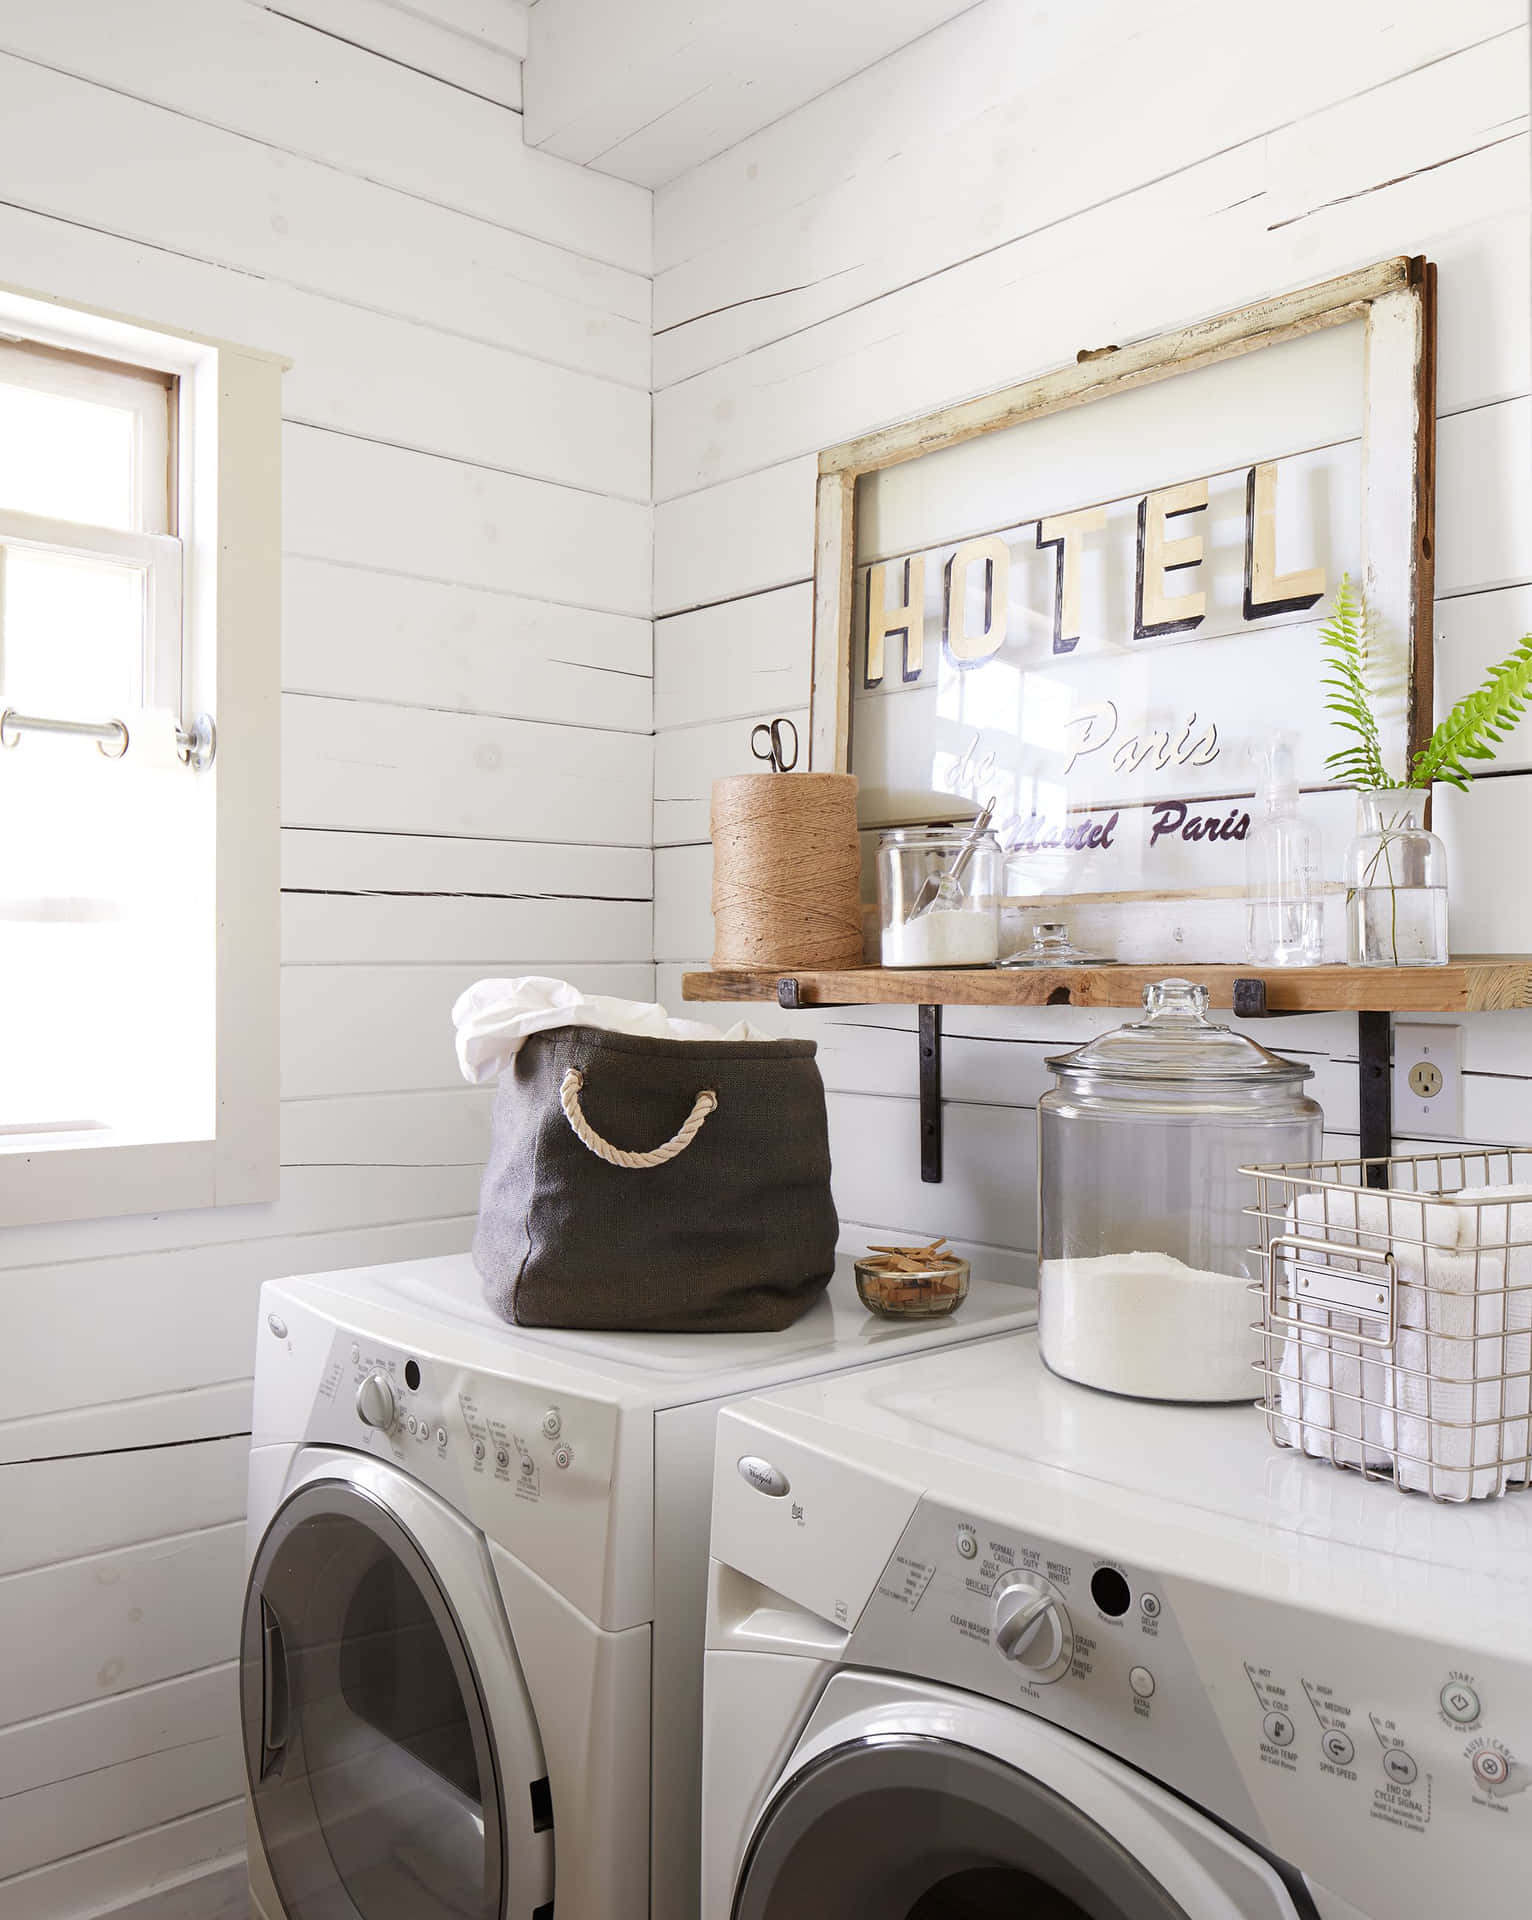 Brightly lit, lusciously clean - laundry should always look this inviting!